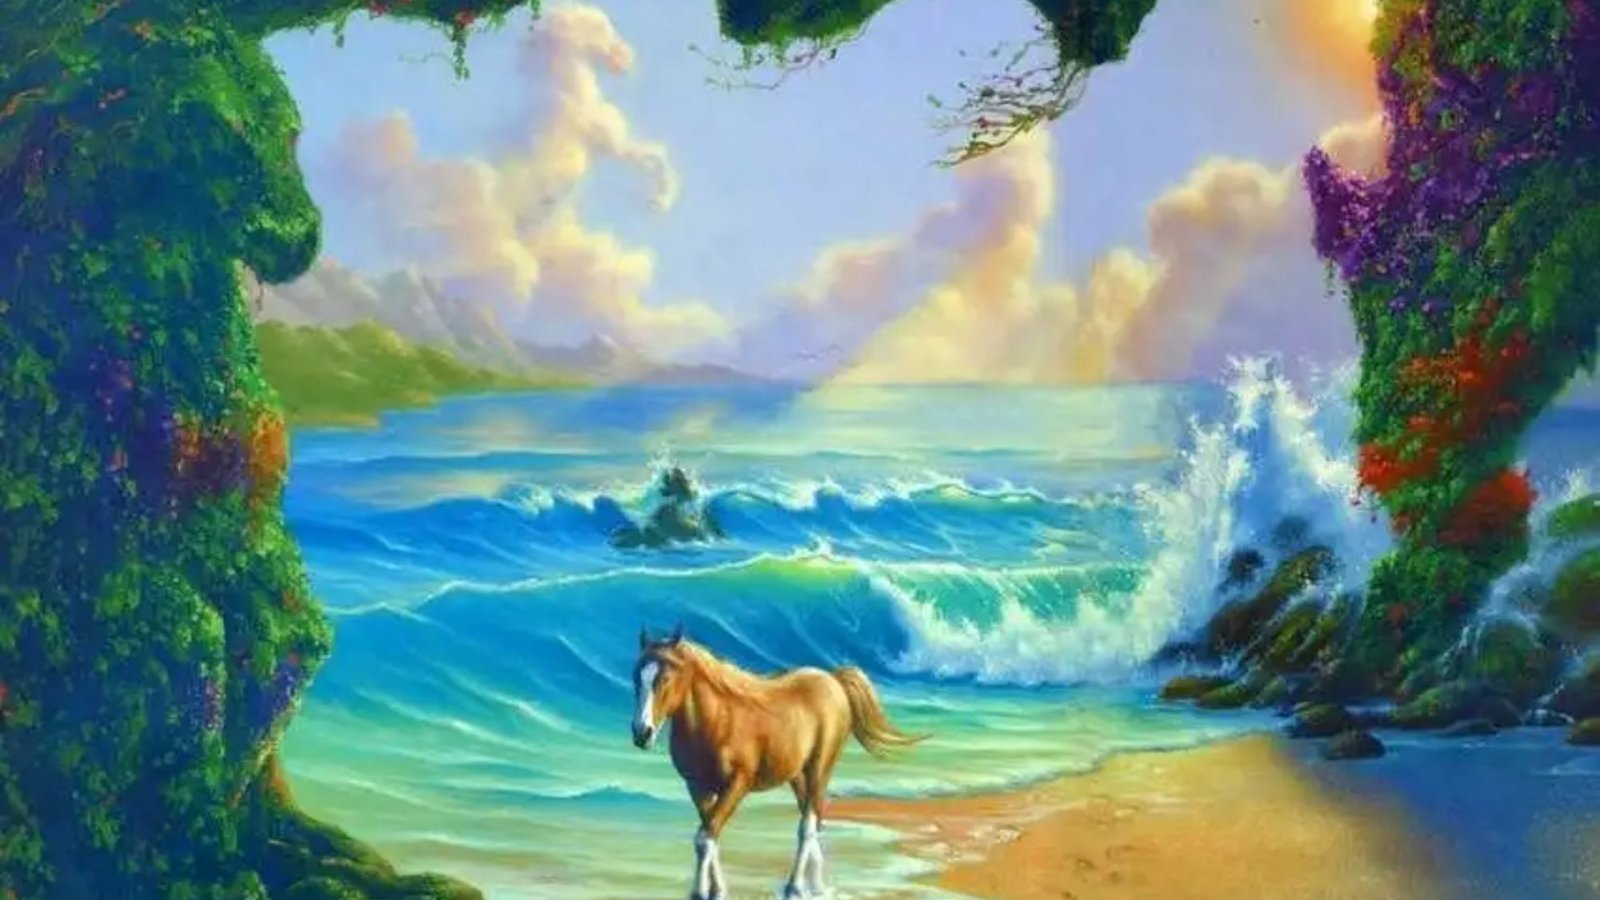 Everyone can see the horse – but you have 20/20 vision & a high IQ if you can see the seven others in nine seconds